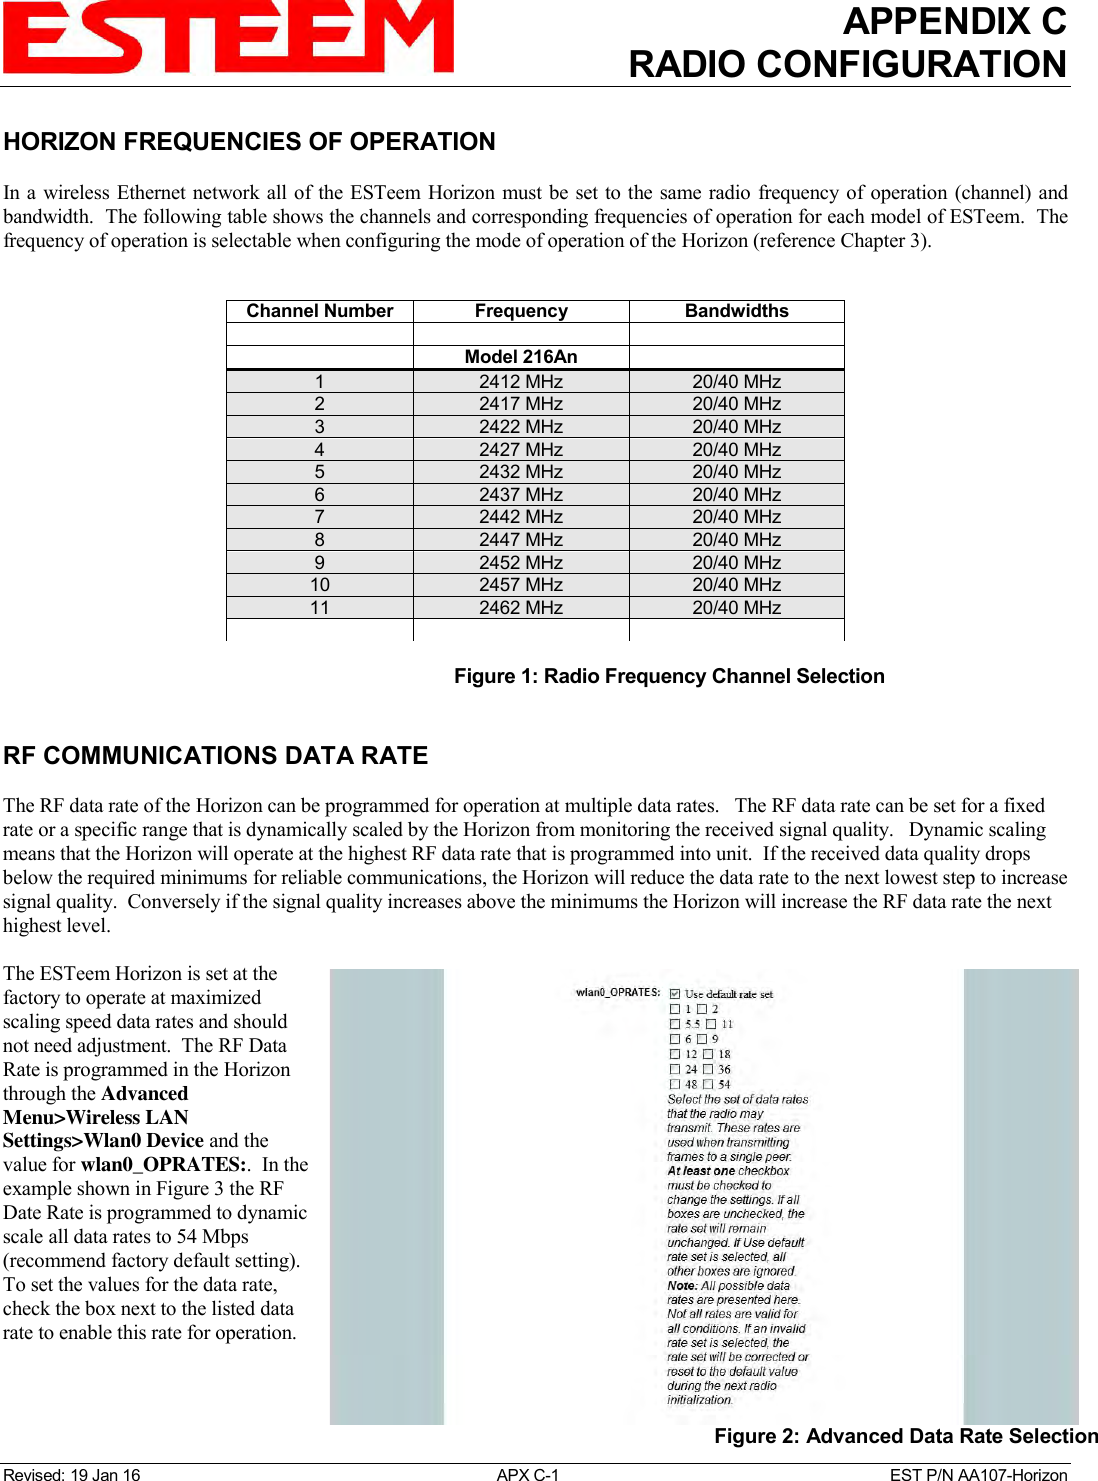 APPENDIX C RADIO CONFIGURATION   Revised: 19 Jan 16  APX C-1  EST P/N AA107-Horizon HORIZON FREQUENCIES OF OPERATION  In a wireless Ethernet network all of the  ESTeem  Horizon must  be set to  the same radio frequency  of operation  (channel) and bandwidth.  The following table shows the channels and corresponding frequencies of operation for each model of ESTeem.  The frequency of operation is selectable when configuring the mode of operation of the Horizon (reference Chapter 3).                                                                                               Figure 1: Radio Frequency Channel Selection    RF COMMUNICATIONS DATA RATE  The RF data rate of the Horizon can be programmed for operation at multiple data rates.   The RF data rate can be set for a fixed rate or a specific range that is dynamically scaled by the Horizon from monitoring the received signal quality.   Dynamic scaling means that the Horizon will operate at the highest RF data rate that is programmed into unit.  If the received data quality drops below the required minimums for reliable communications, the Horizon will reduce the data rate to the next lowest step to increase signal quality.  Conversely if the signal quality increases above the minimums the Horizon will increase the RF data rate the next highest level.  The ESTeem Horizon is set at the factory to operate at maximized scaling speed data rates and should not need adjustment.  The RF Data Rate is programmed in the Horizon through the Advanced Menu&gt;Wireless LAN Settings&gt;Wlan0 Device and the value for wlan0_OPRATES:.  In the example shown in Figure 3 the RF Date Rate is programmed to dynamic scale all data rates to 54 Mbps (recommend factory default setting).  To set the values for the data rate, check the box next to the listed data rate to enable this rate for operation.   Channel Number Frequency Bandwidths     Model 216An  1 2412 MHz 20/40 MHz 2 2417 MHz 20/40 MHz 3 2422 MHz 20/40 MHz 4 2427 MHz 20/40 MHz 5 2432 MHz 20/40 MHz 6 2437 MHz 20/40 MHz 7 2442 MHz 20/40 MHz 8 2447 MHz 20/40 MHz 9 2452 MHz 20/40 MHz 10 2457 MHz 20/40 MHz 11 2462 MHz 20/40 MHz     Figure 2: Advanced Data Rate Selection 